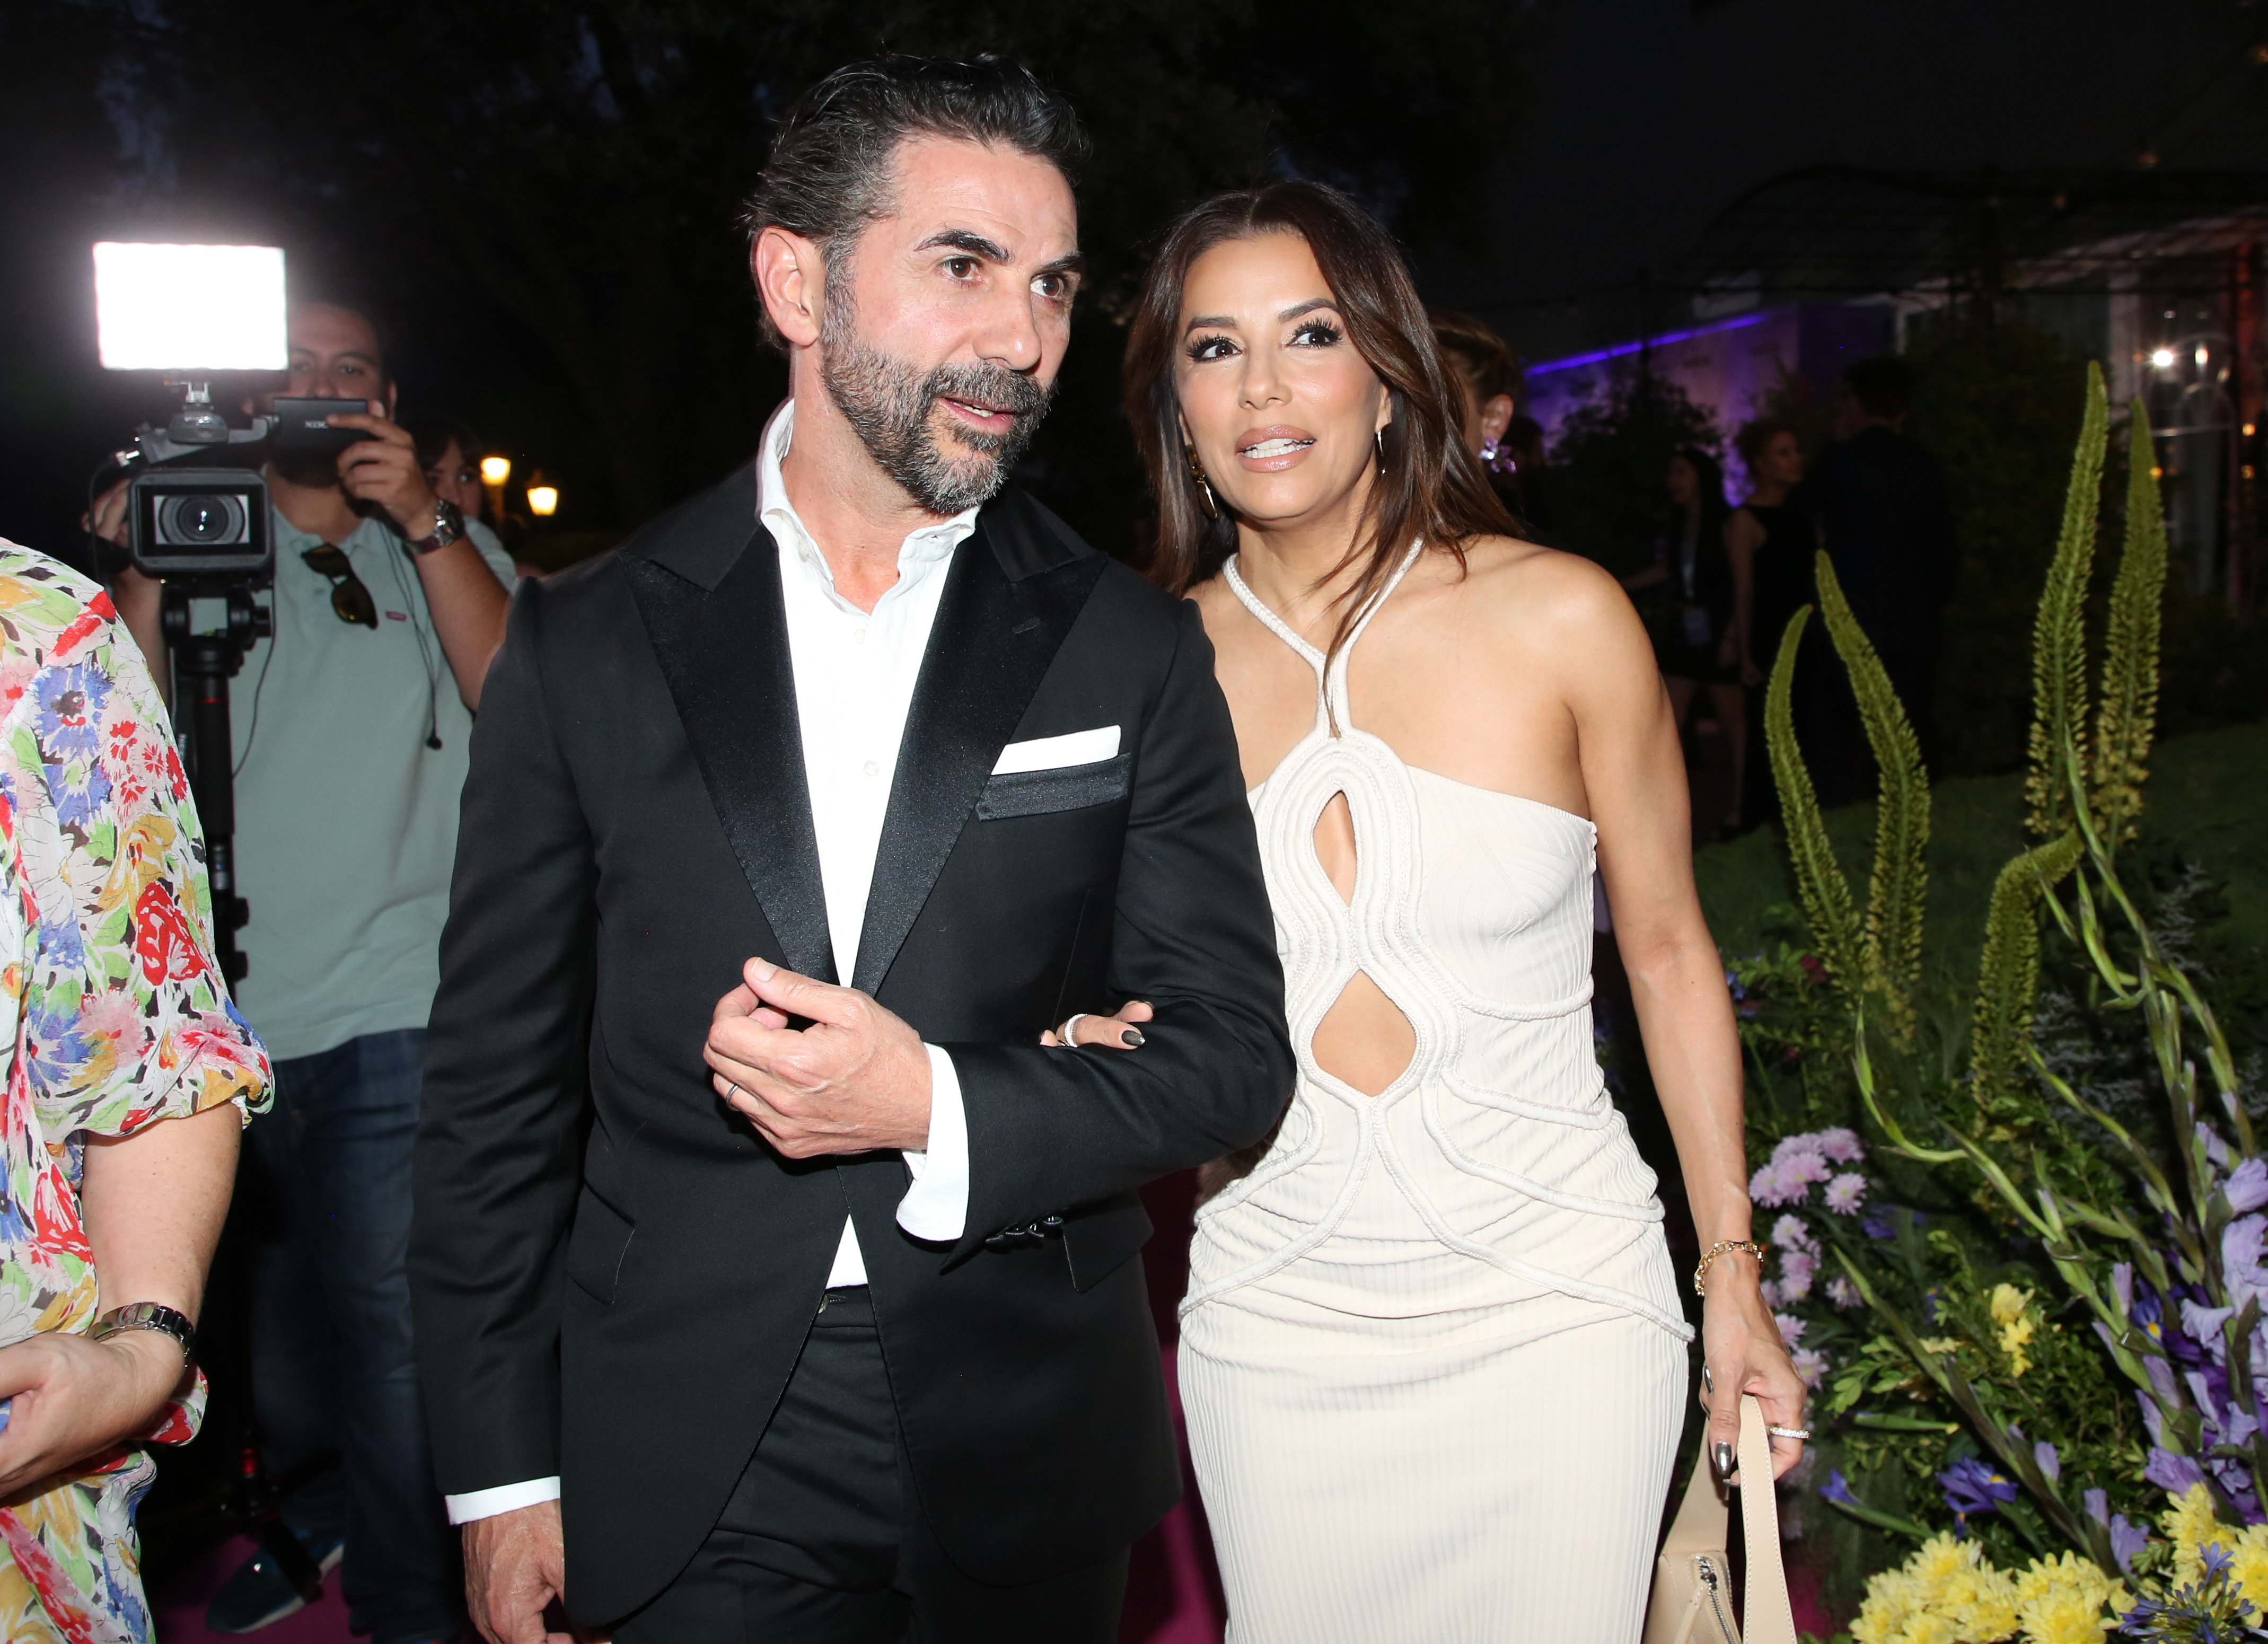 Eva Longoria and Pepe Baston attend the party held by the production company 'Bambu Producciones' to celebrate its 15th anniversary in Madrid, Spain, on June 29, 2023. | Source: Getty Images